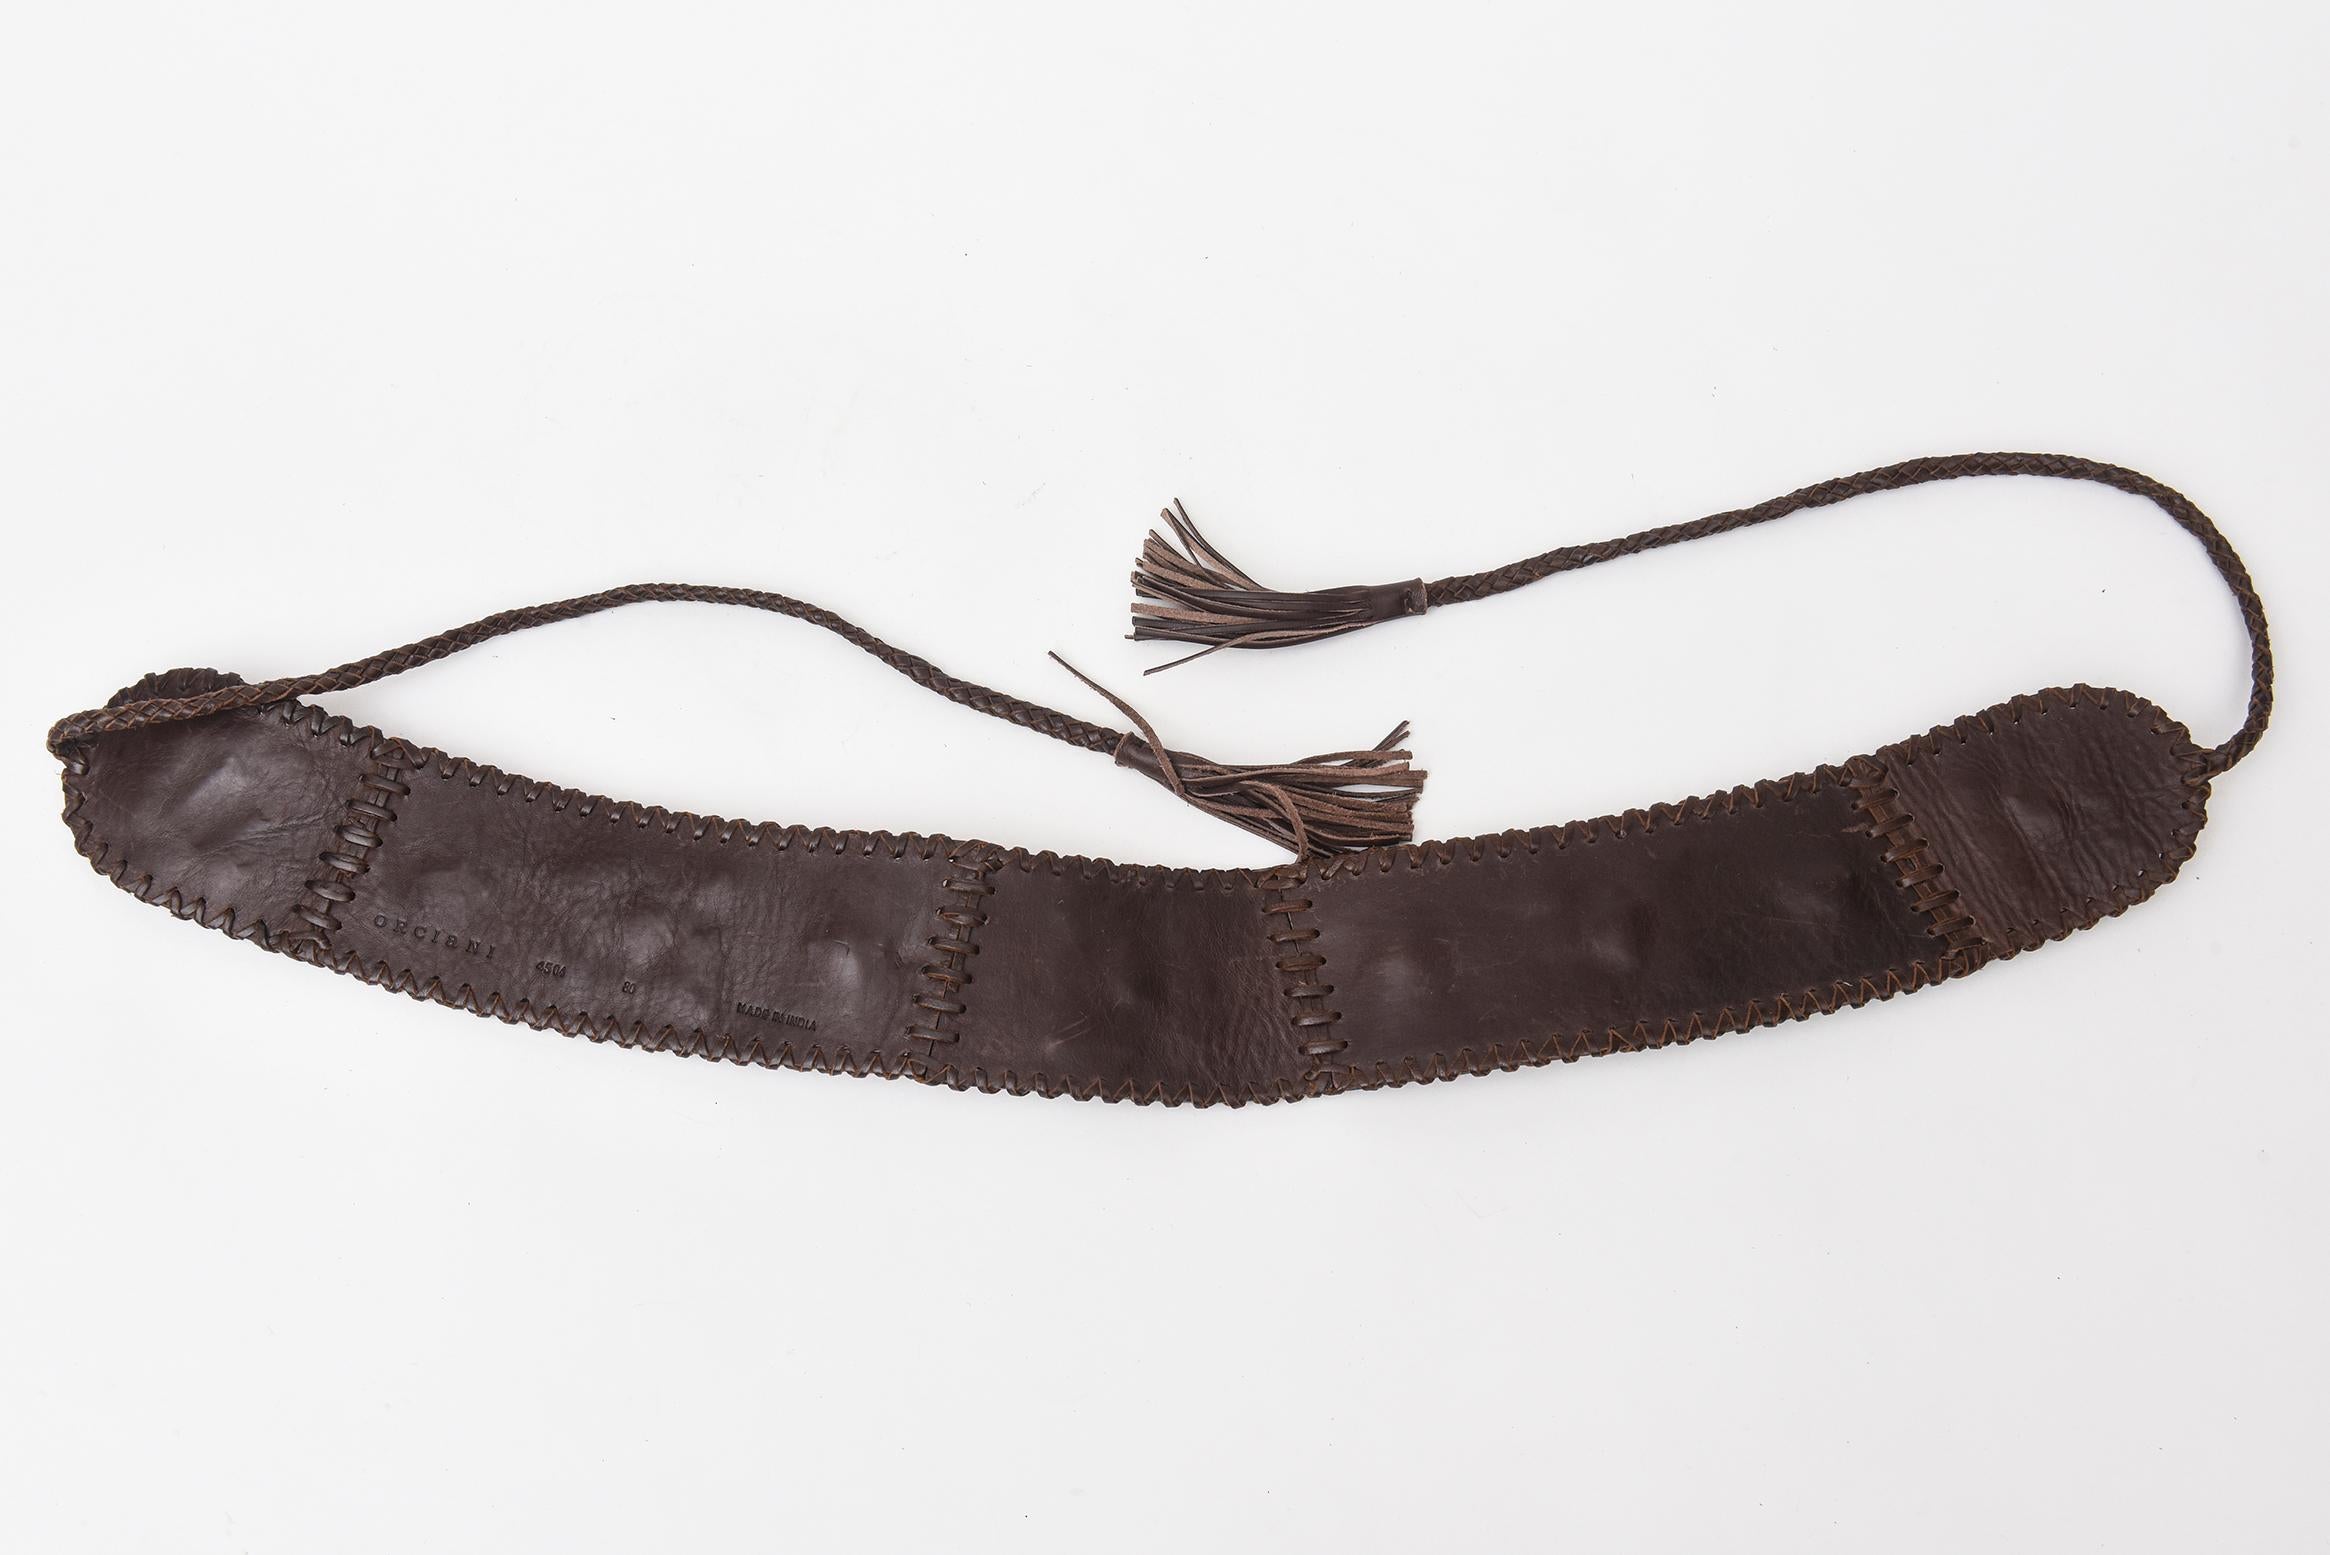 Brown Stitched Leather And Colored Agate Stones Tie Waist Belt with Tassels In Good Condition For Sale In North Miami, FL